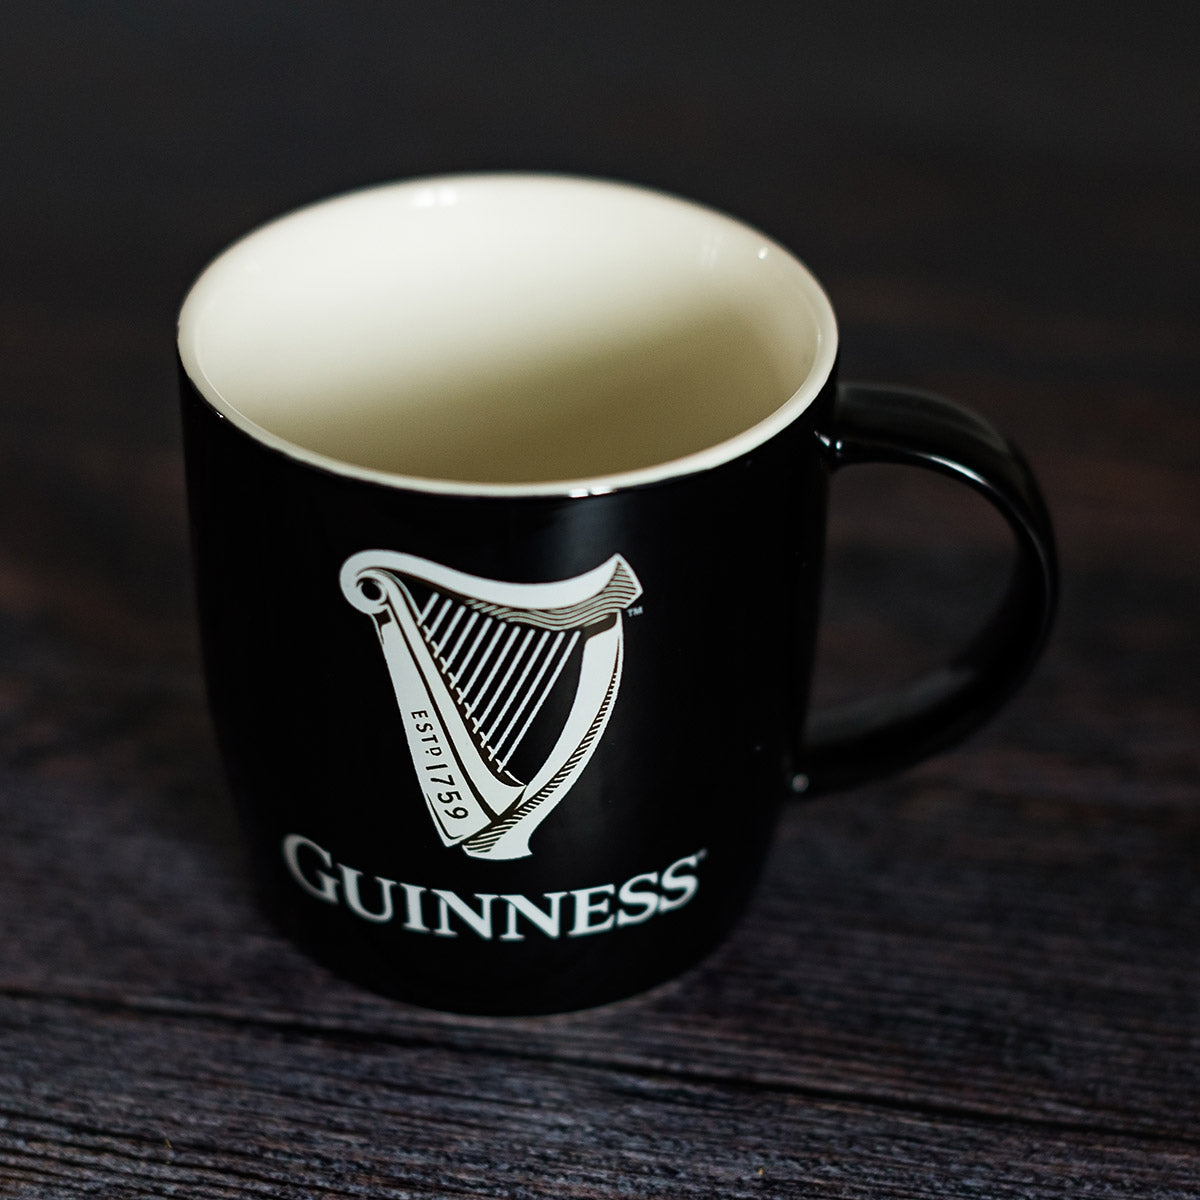 Guinness Black Mug with White Harp Logo resting on a sturdy wooden table.